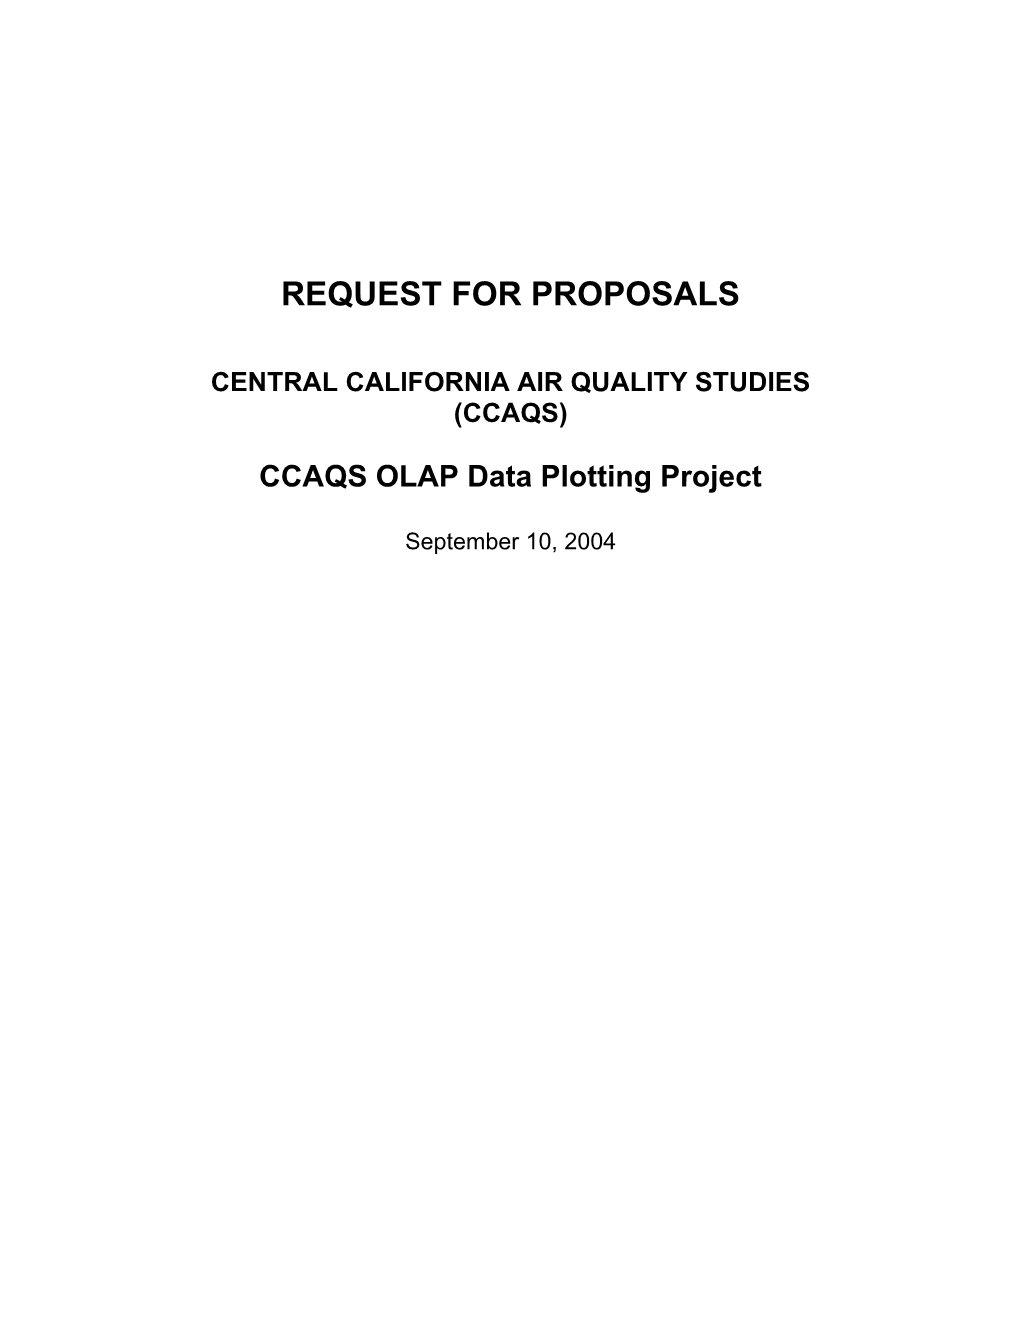 RFP CRPAQS Modeling